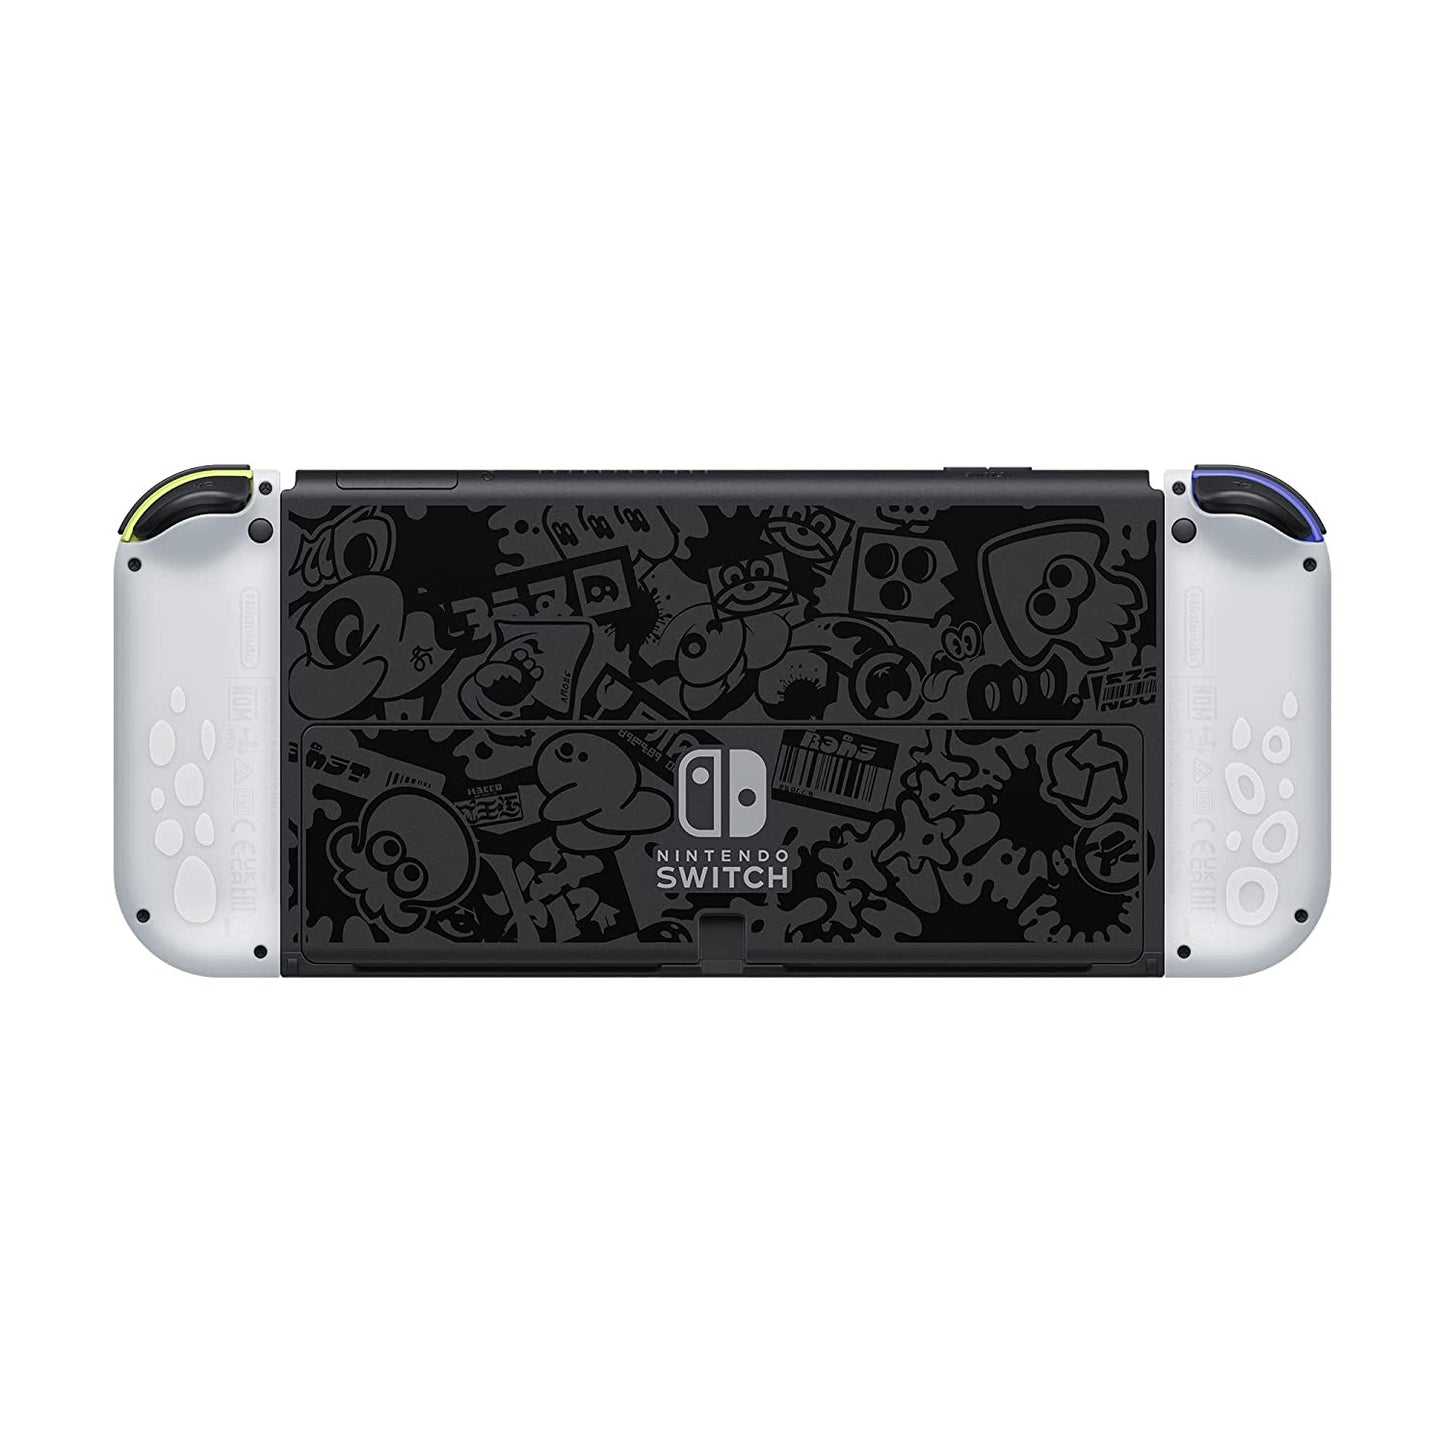 Switch – OLED Model Splatoon 3 Special Edition